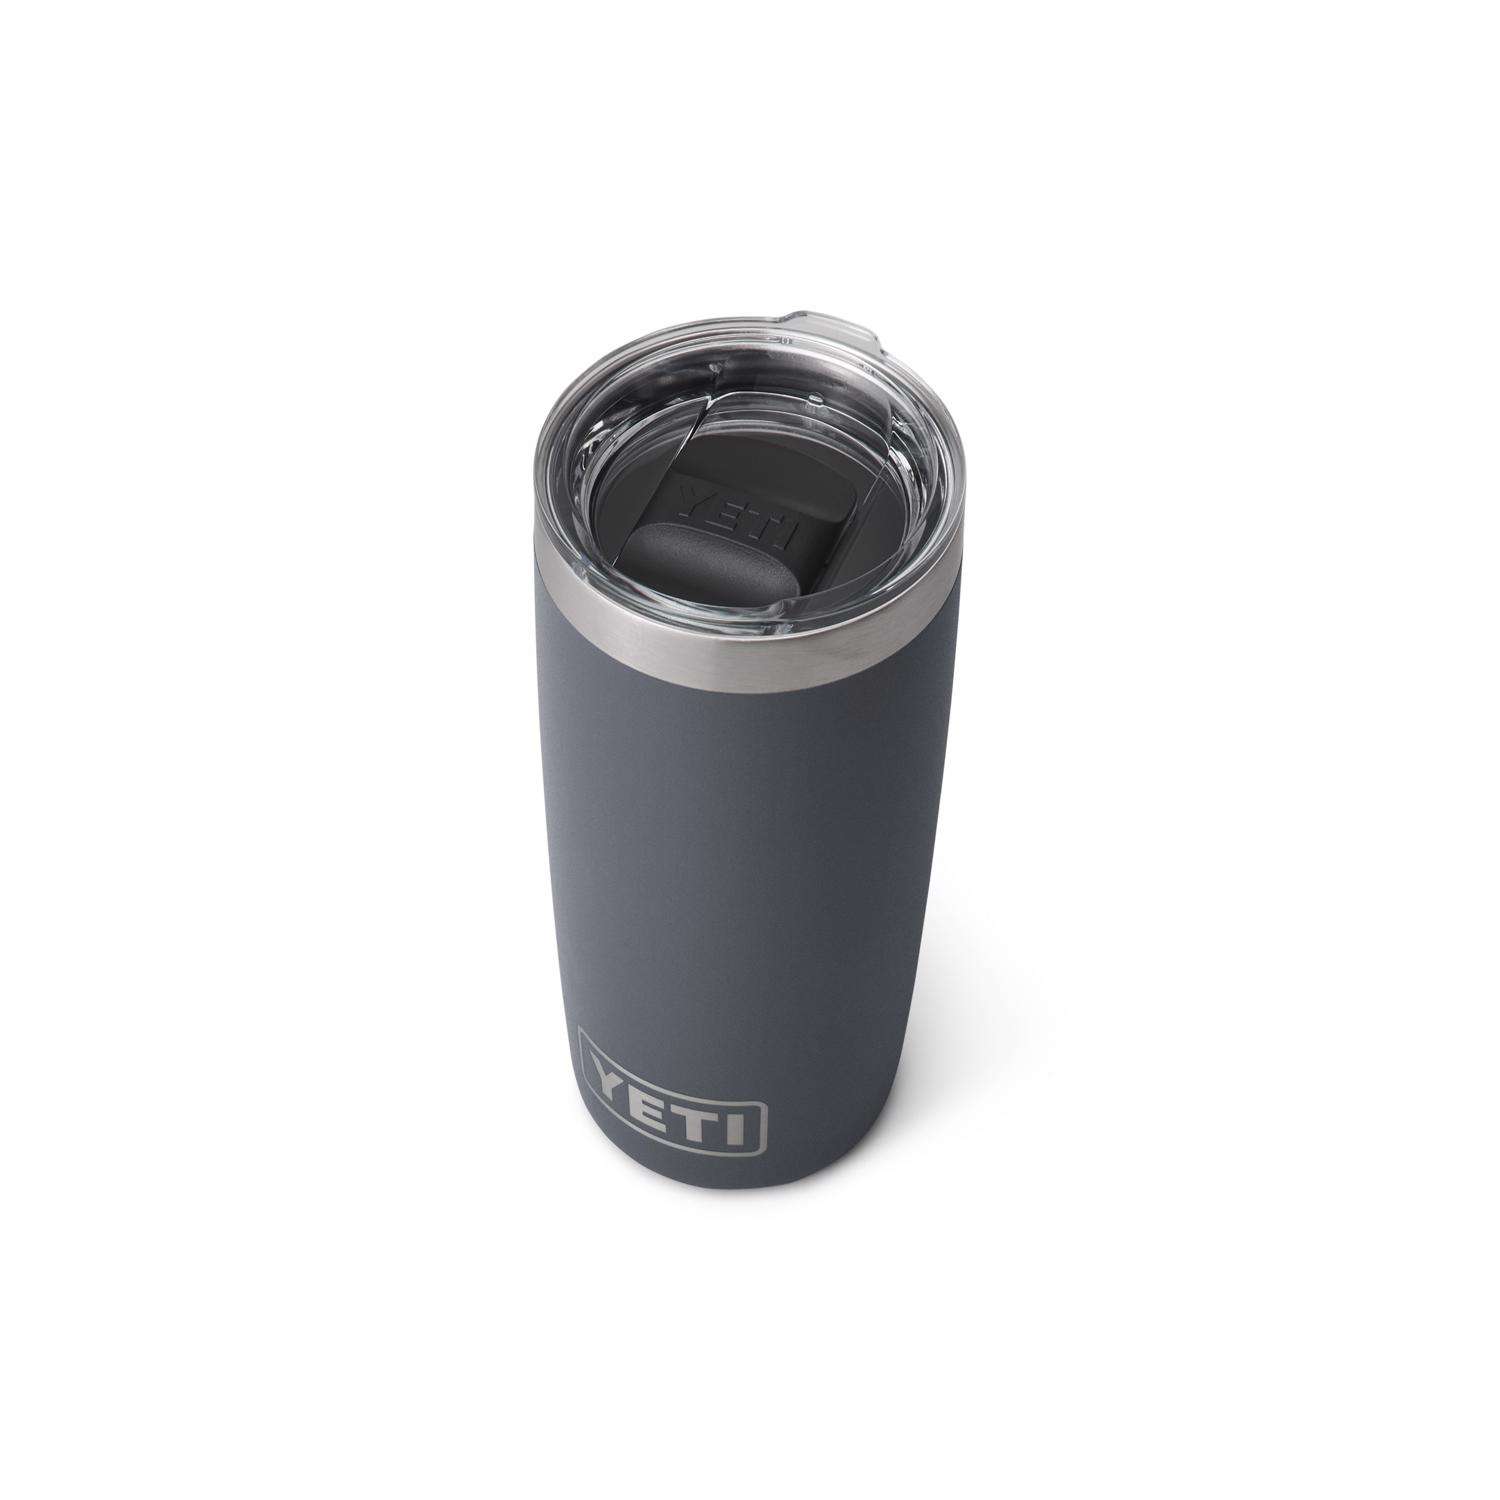 YETI Rambler 20 Oz Tumbler with MagSlider Lid in Charcoal Gray